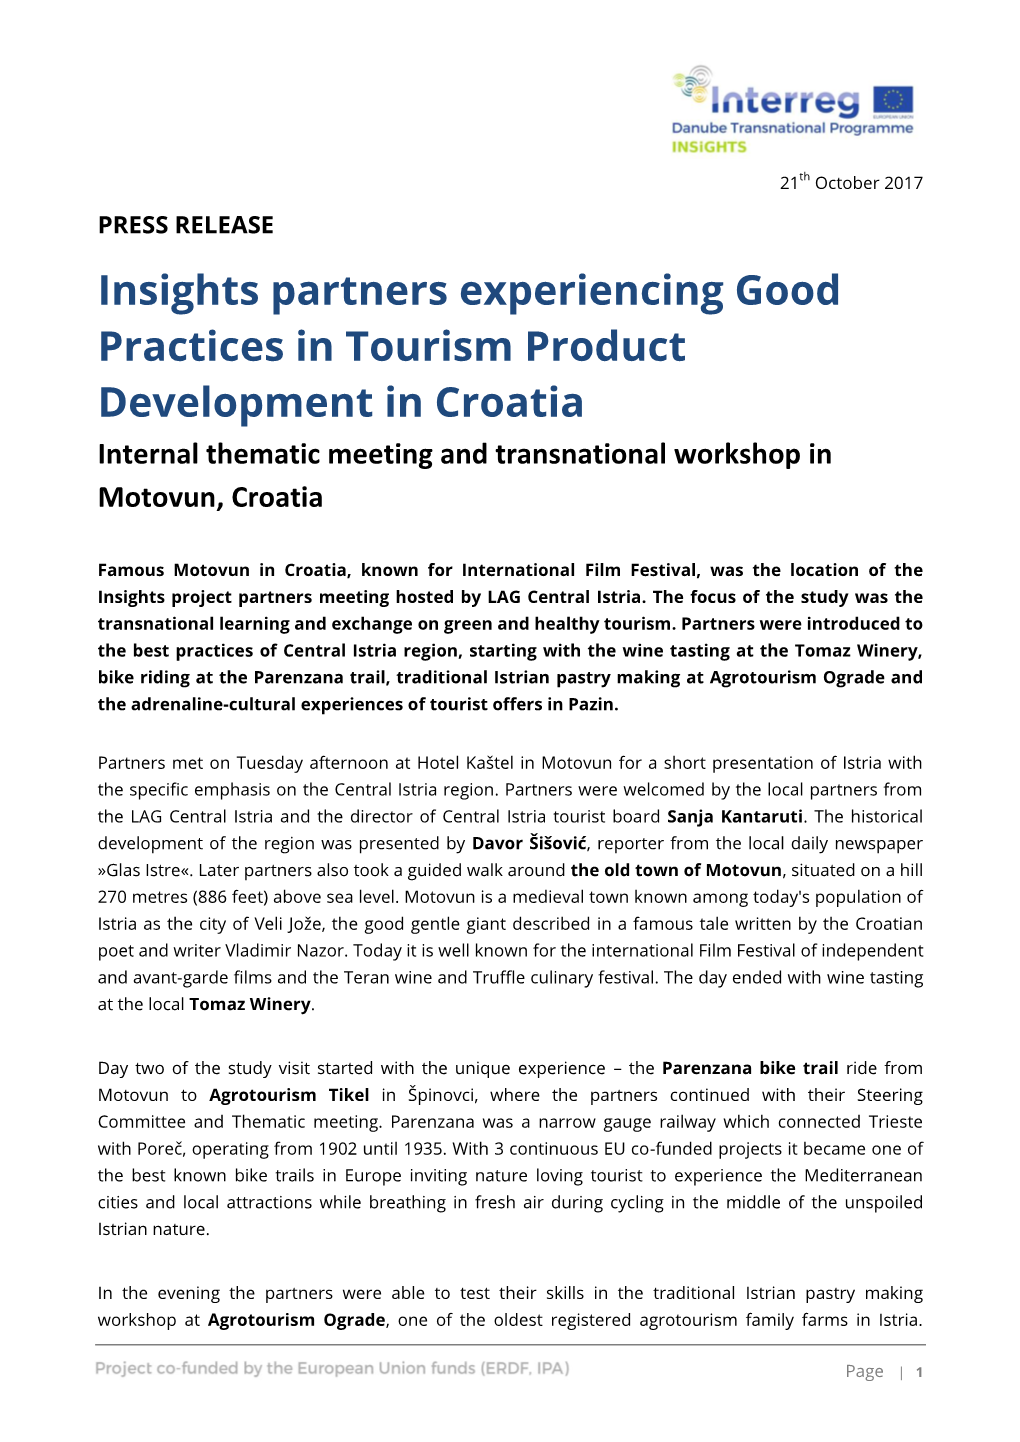 Insights Partners Experiencing Good Practices in Tourism Product Development in Croatia Internal Thematic Meeting and Transnational Workshop in Motovun, Croatia